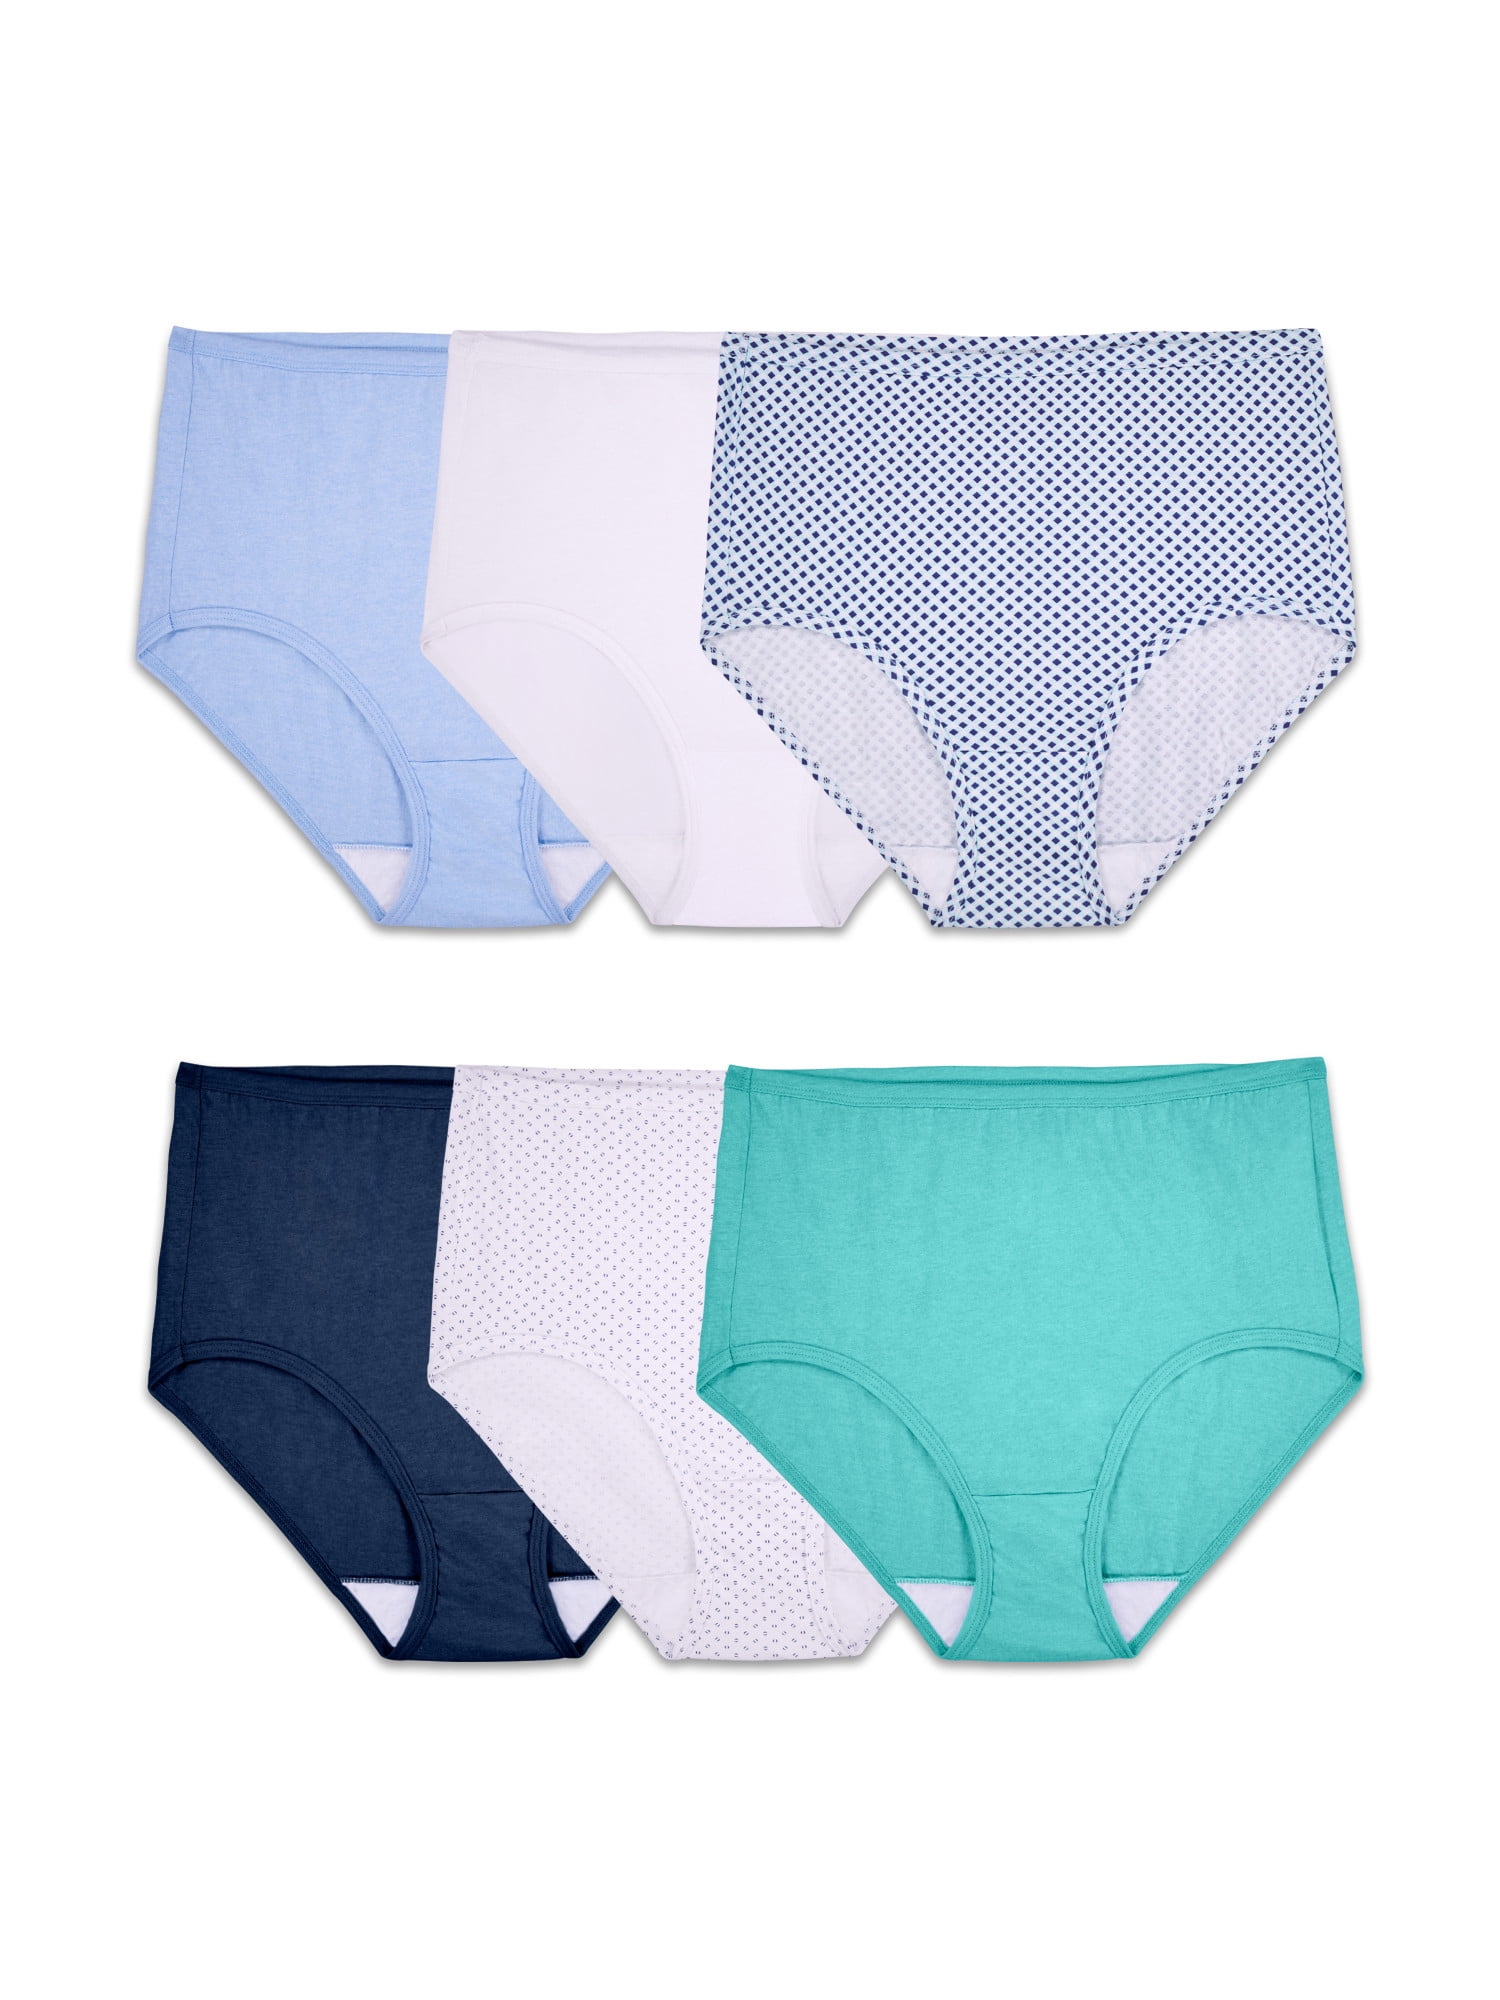 20 Wholesale Fruit Of The Loom Girl's Cotton Stretch Briefs 6 Pack - at 